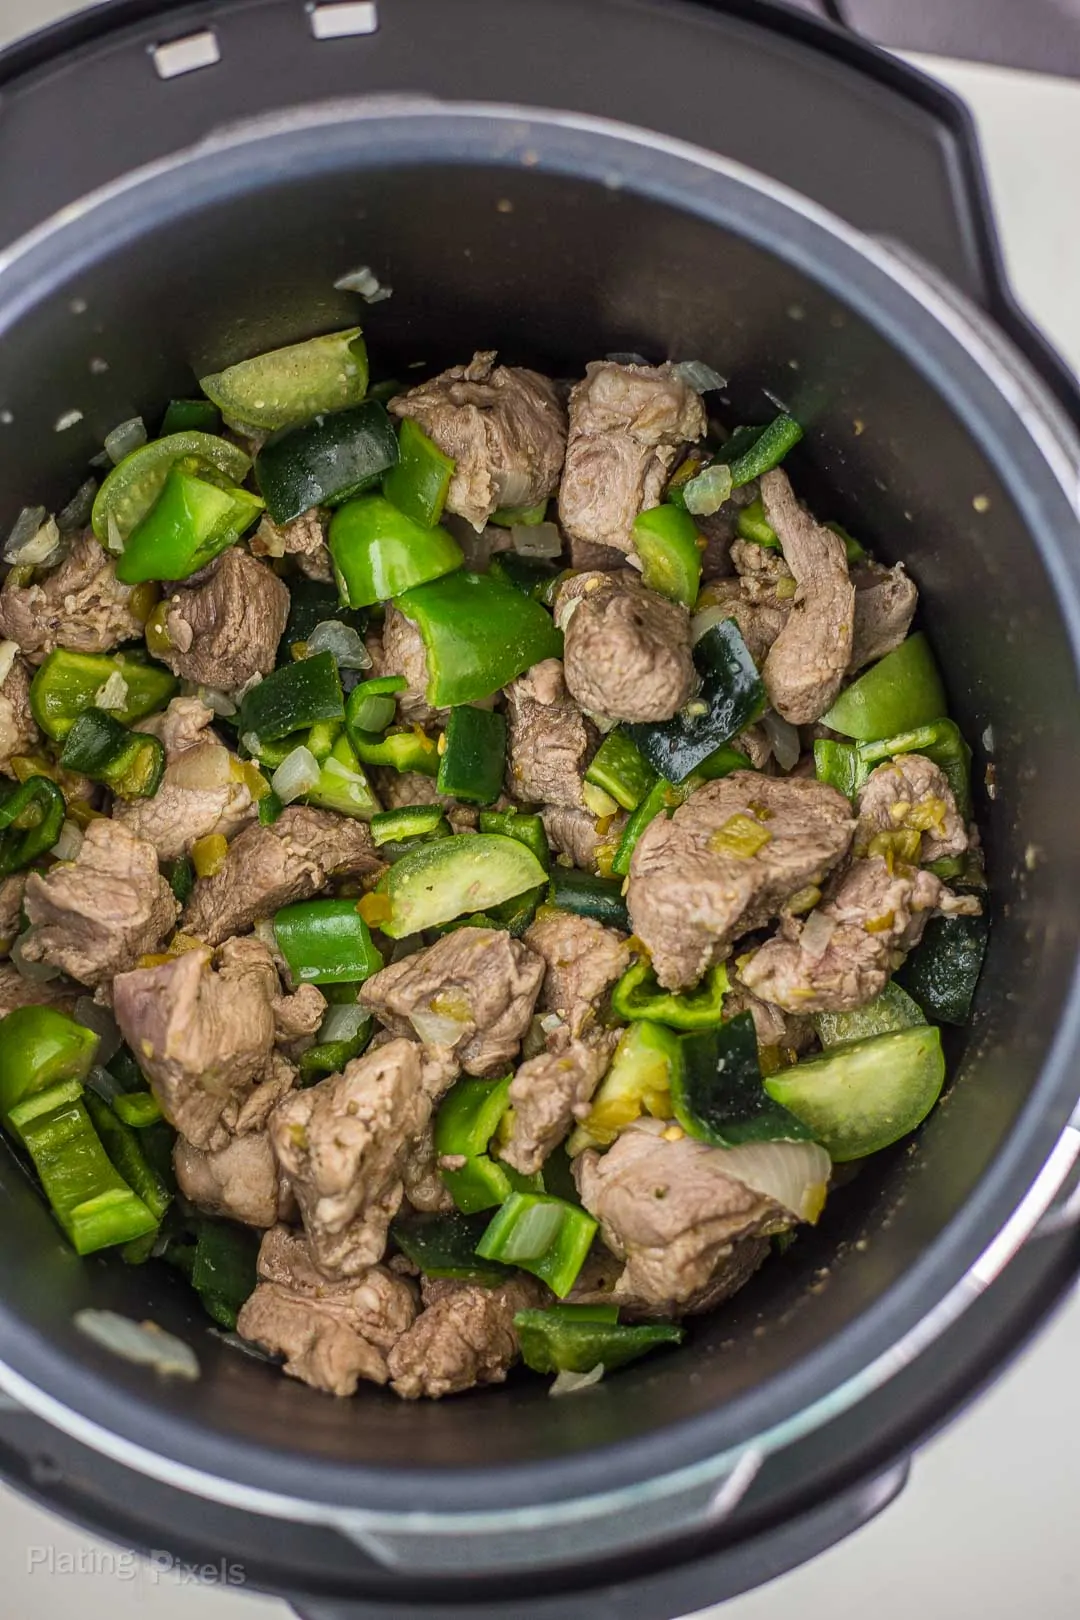 Pork shoulder, chunks tomatillo and peppers in a pressure cooker ready to be cooked